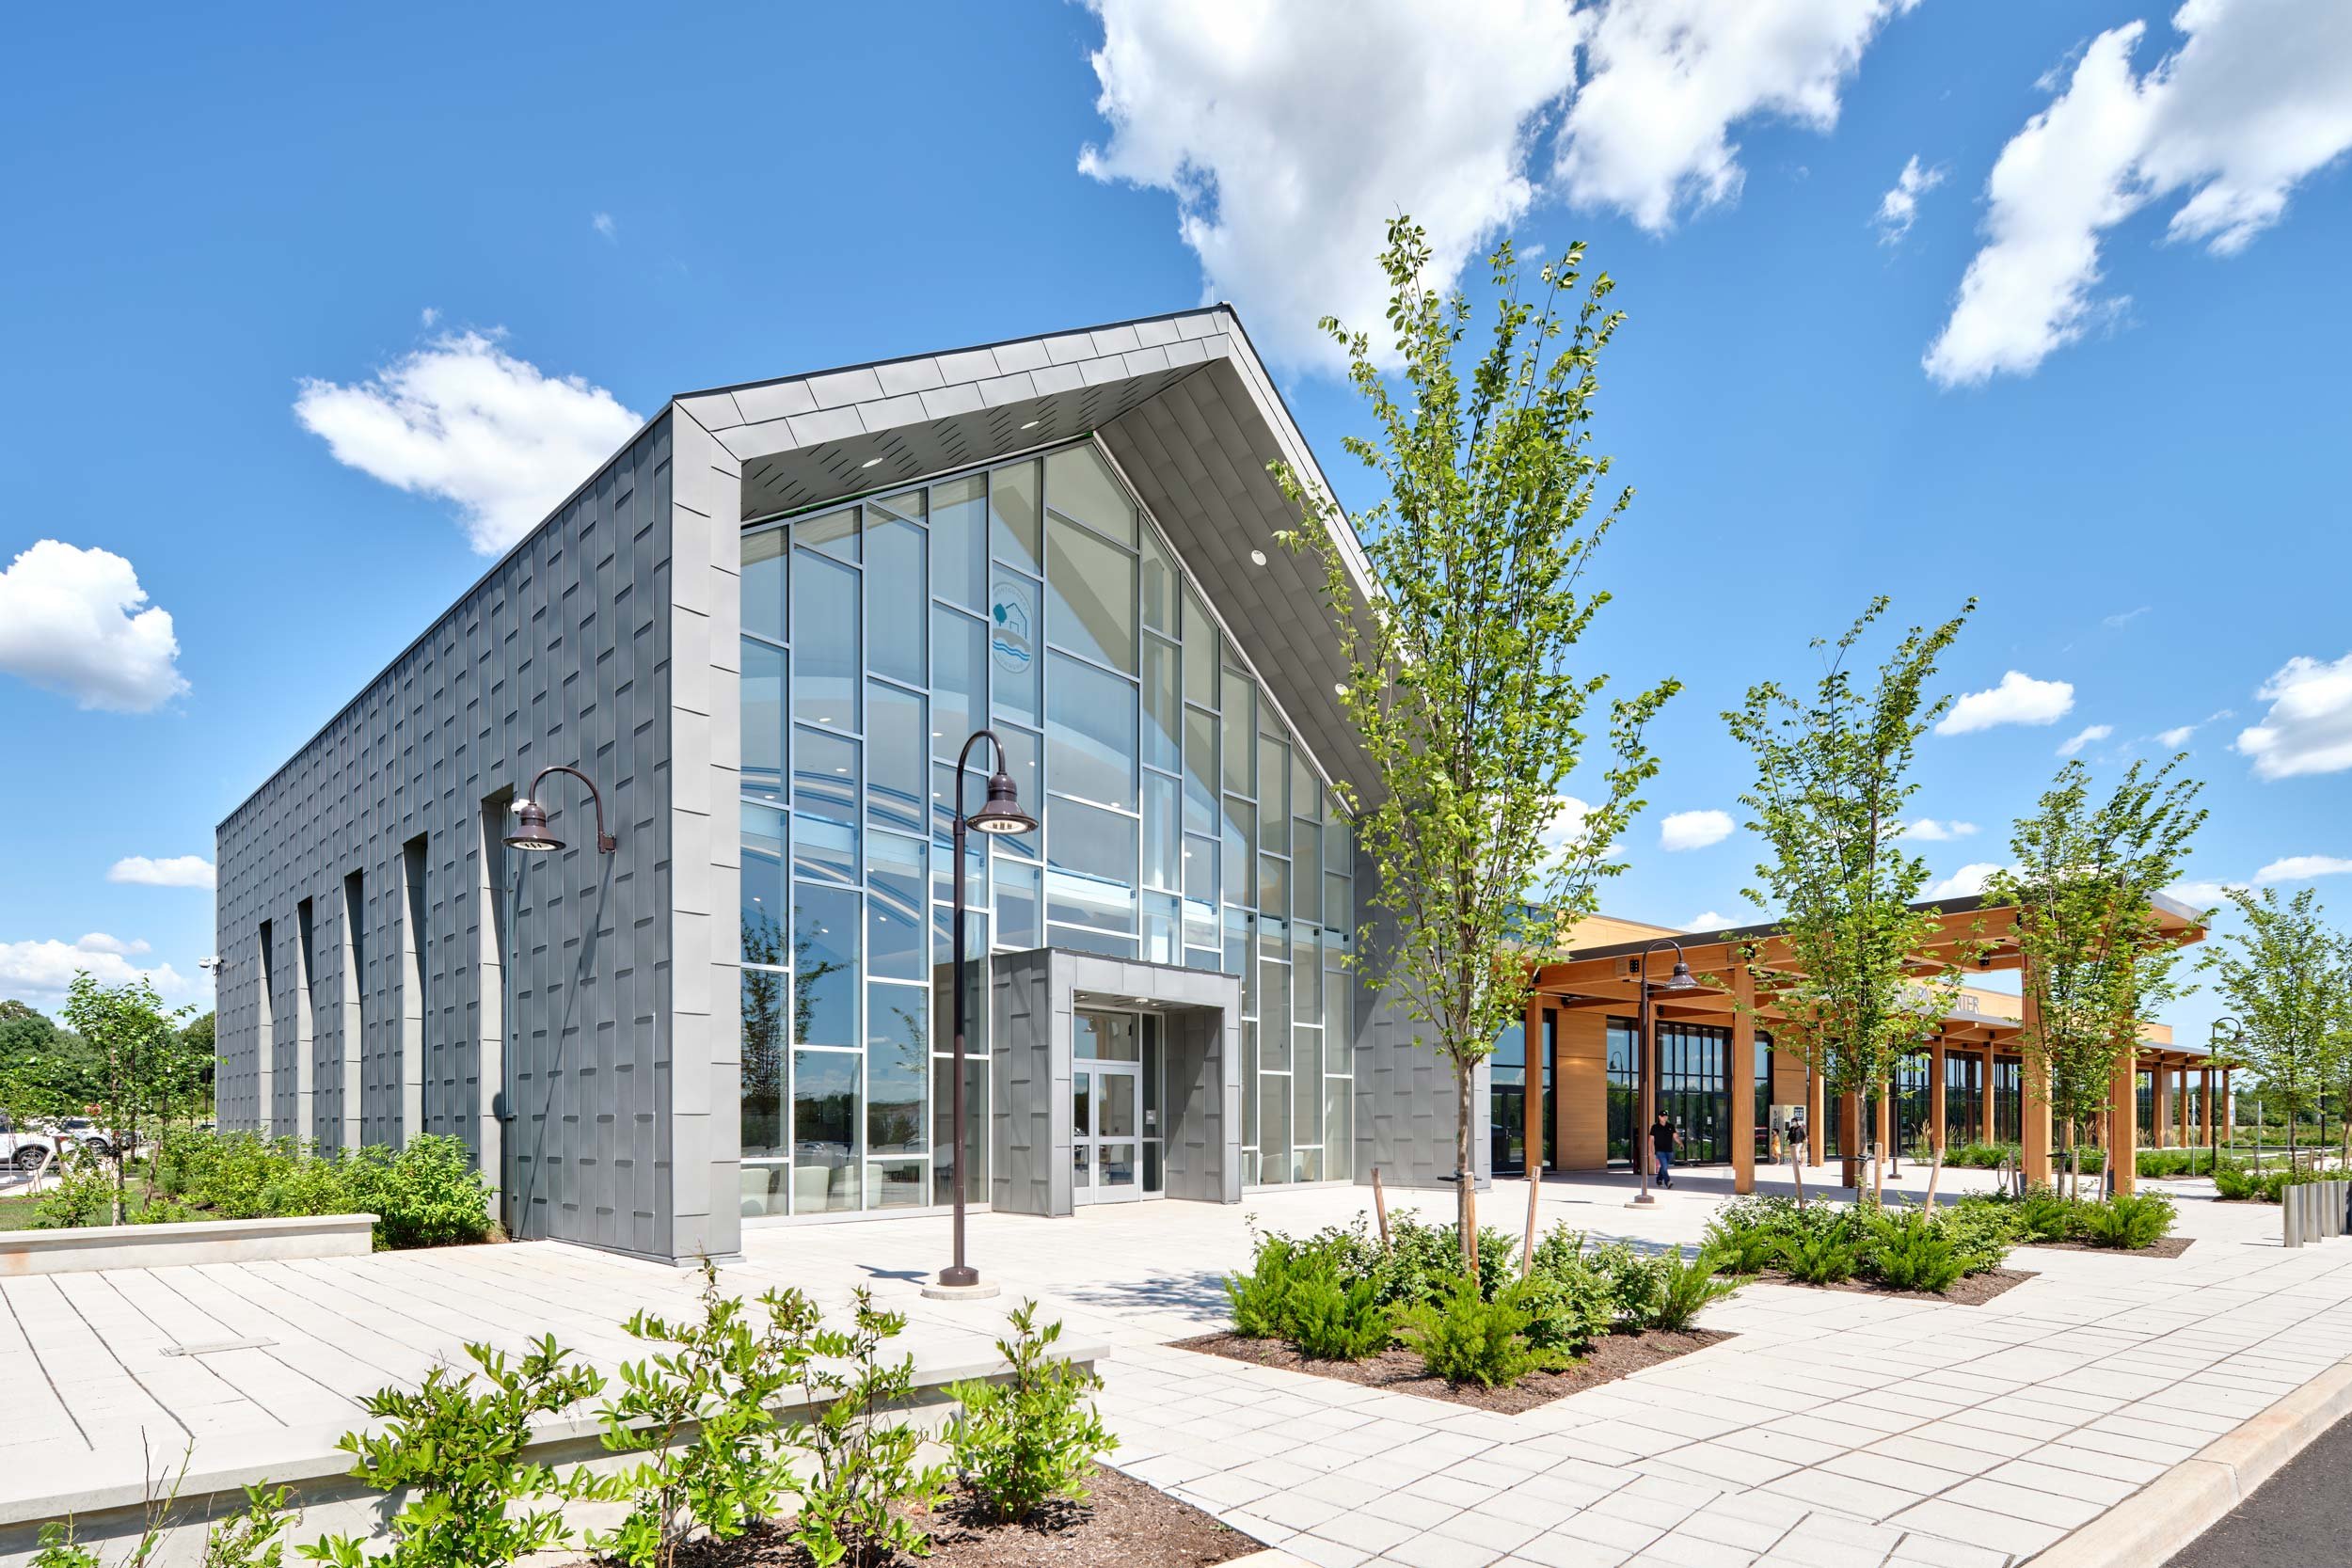  Montgomery Municipal Building DMR Architects Skillman, NJ See more in  Civic/Cultural/Religious  